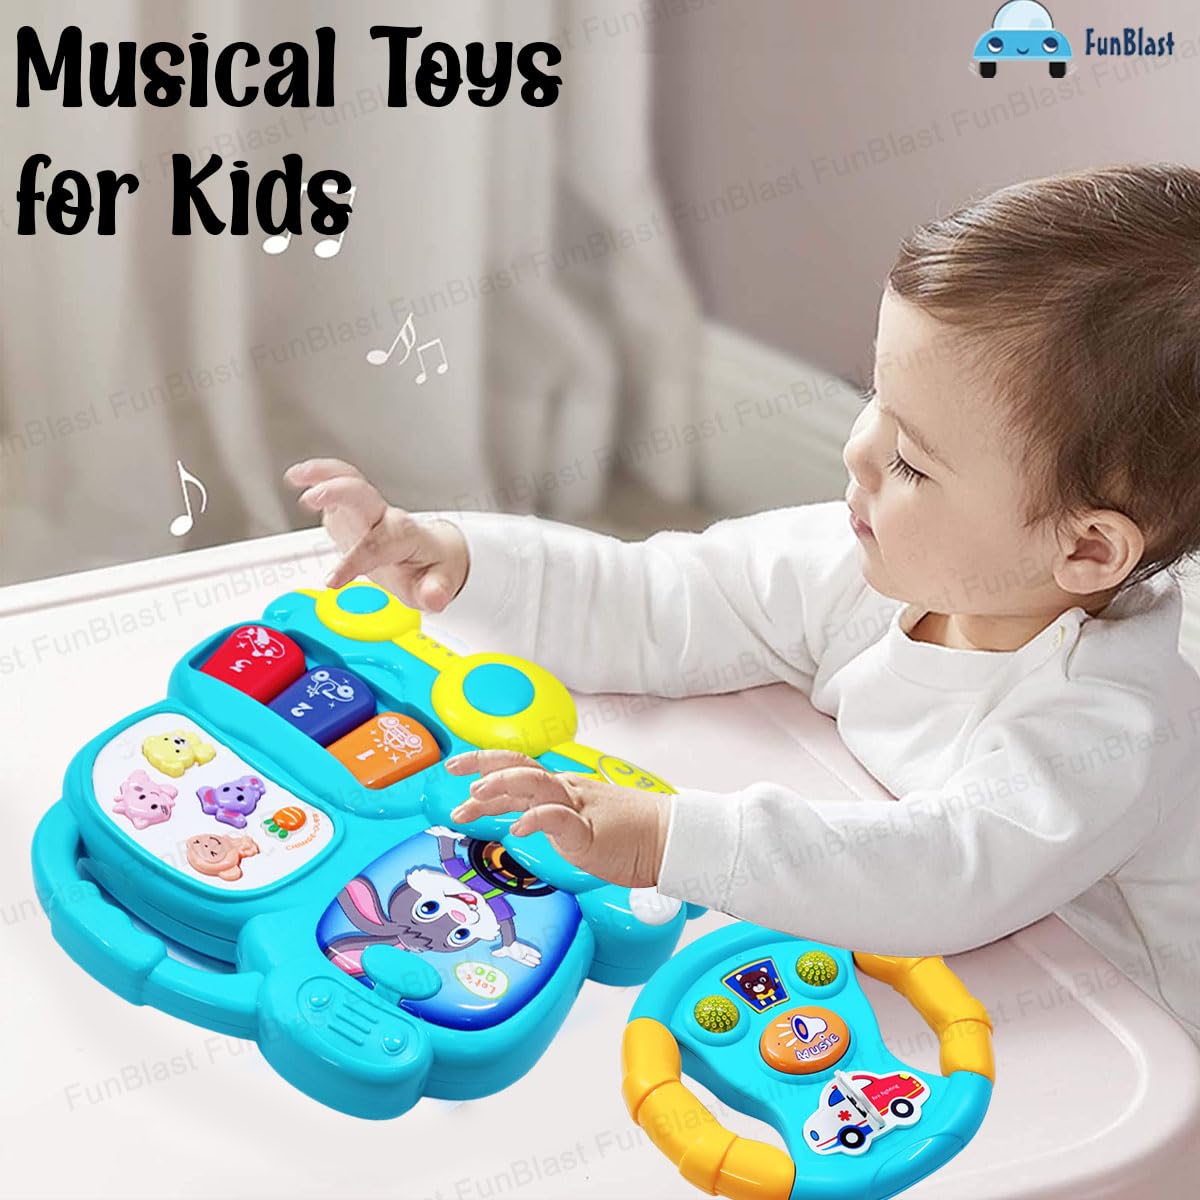 FunBlast Musical Toys for Kids, Toy Piano and Steering Wheel Toys for Kids, Musical Instrument Toy, Baby Toy for 1+ Years Kid, Boy, Girl, Early Development Activity Toys for Babies